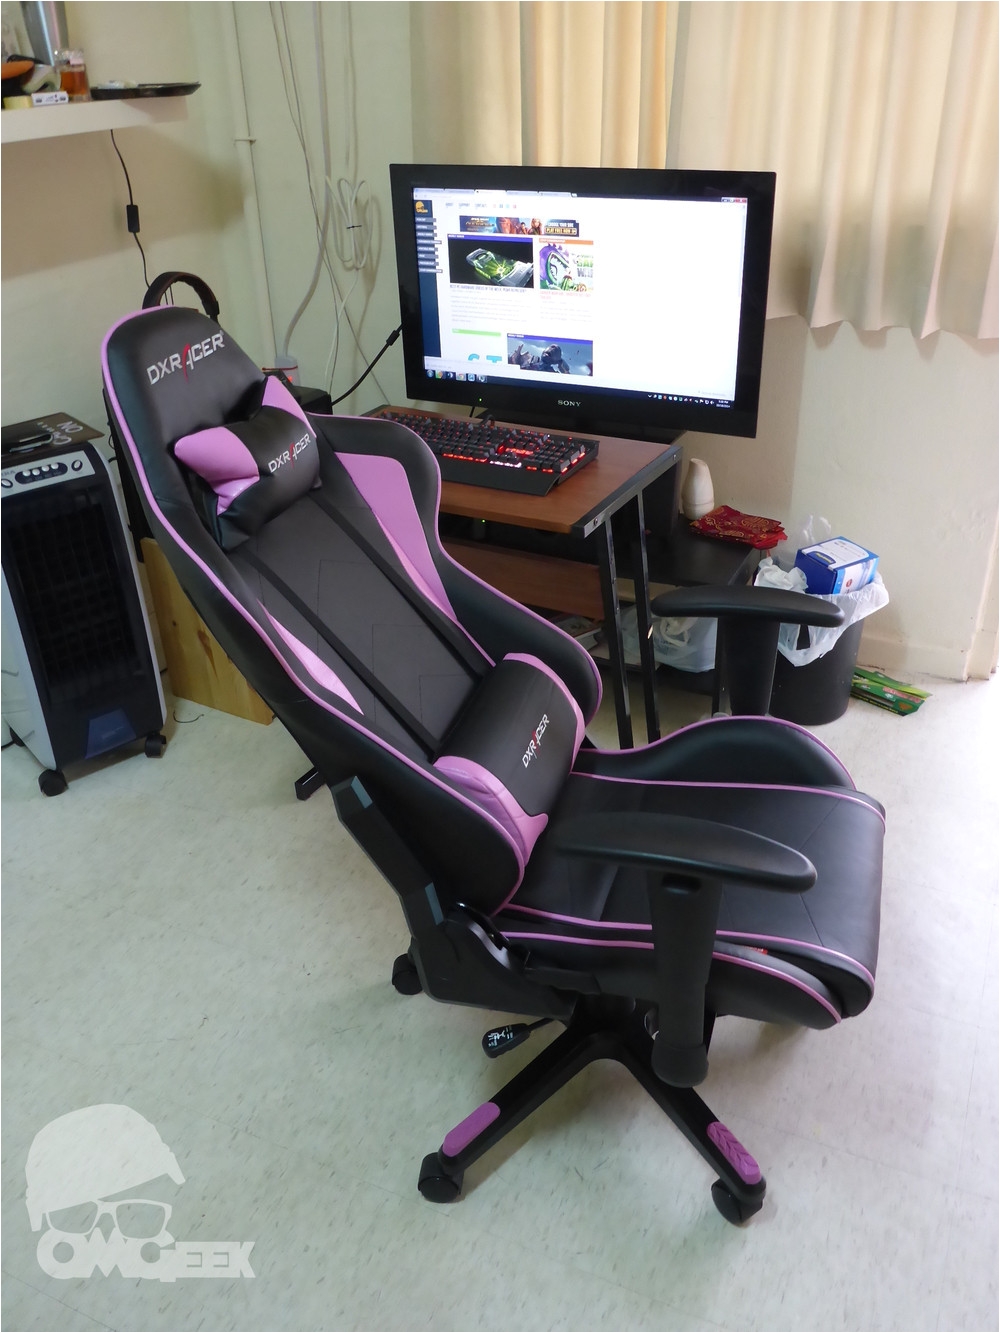 Cheap Racing Chair Philippines 45 Inspirational Dxracer Gaming Chair Cheap Gaming Room Decorations